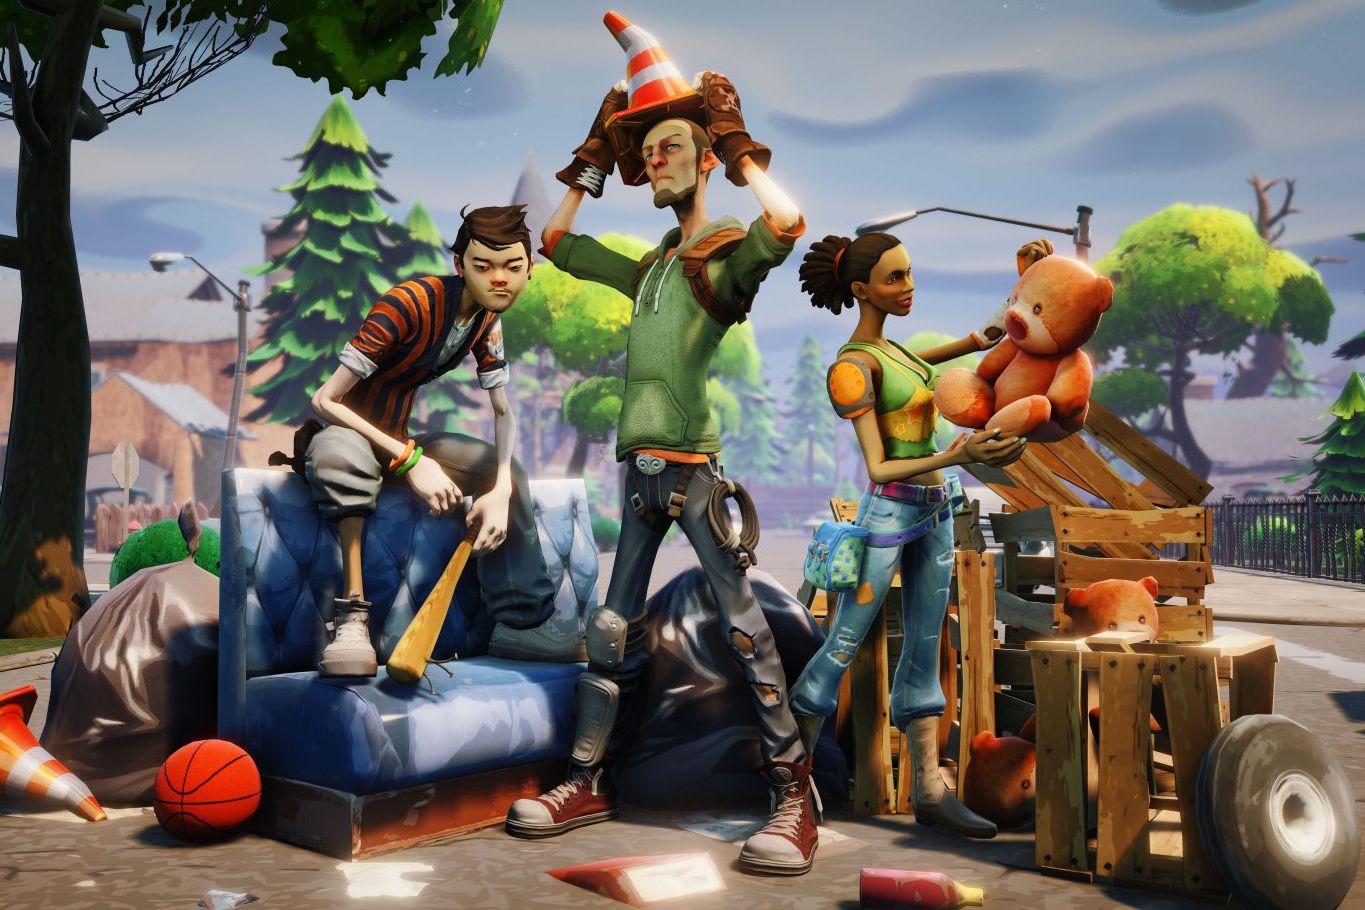 Fortnite Save the World will not be going free-to-play